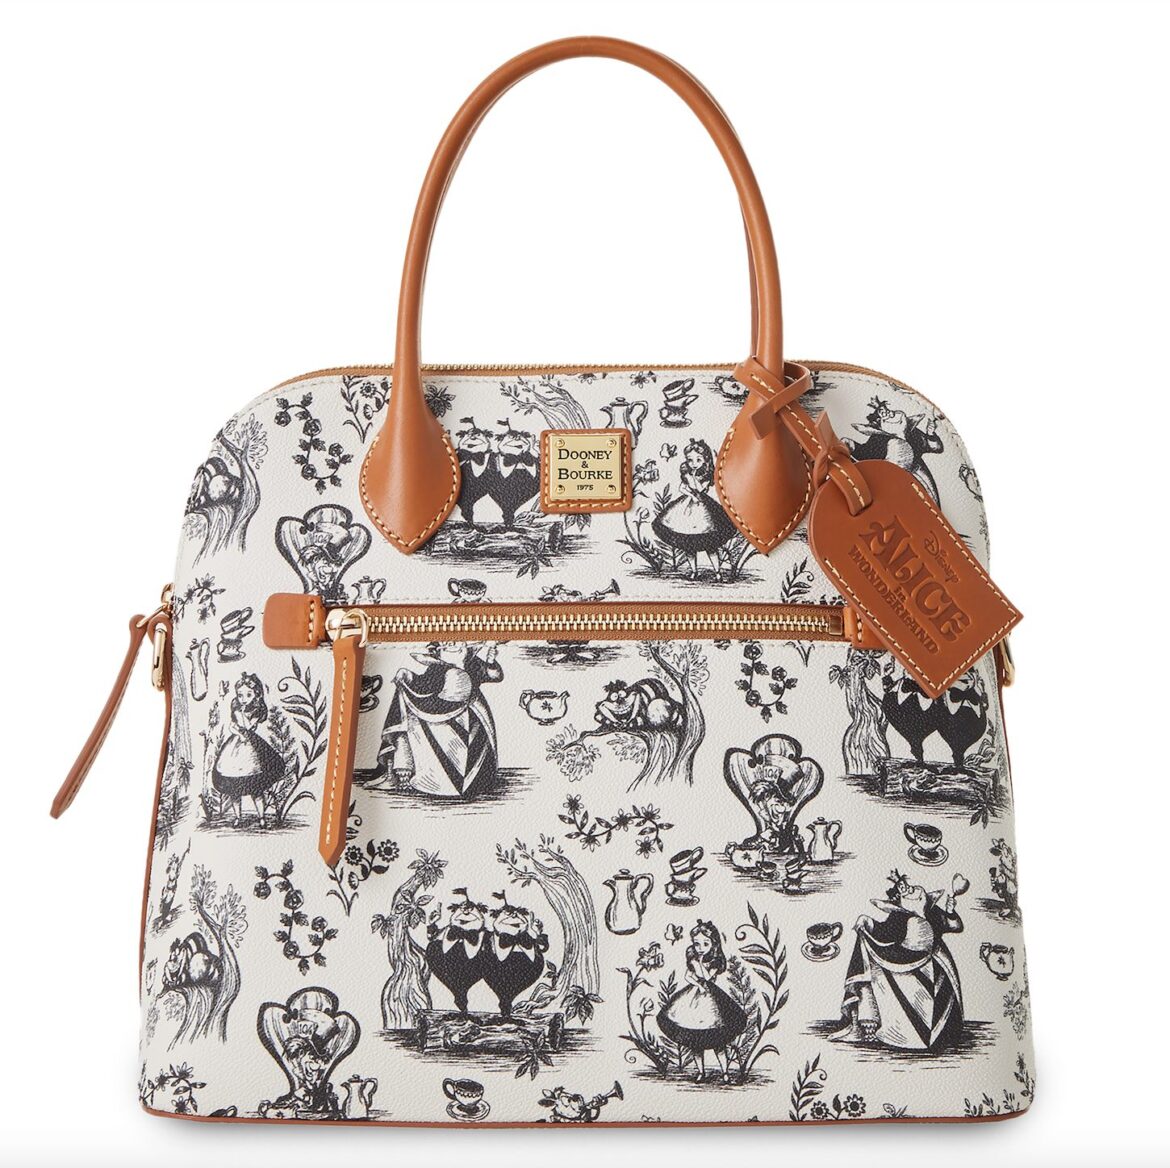 Whimsical New Alice in Wonderland Dooney & Bourke Collection!